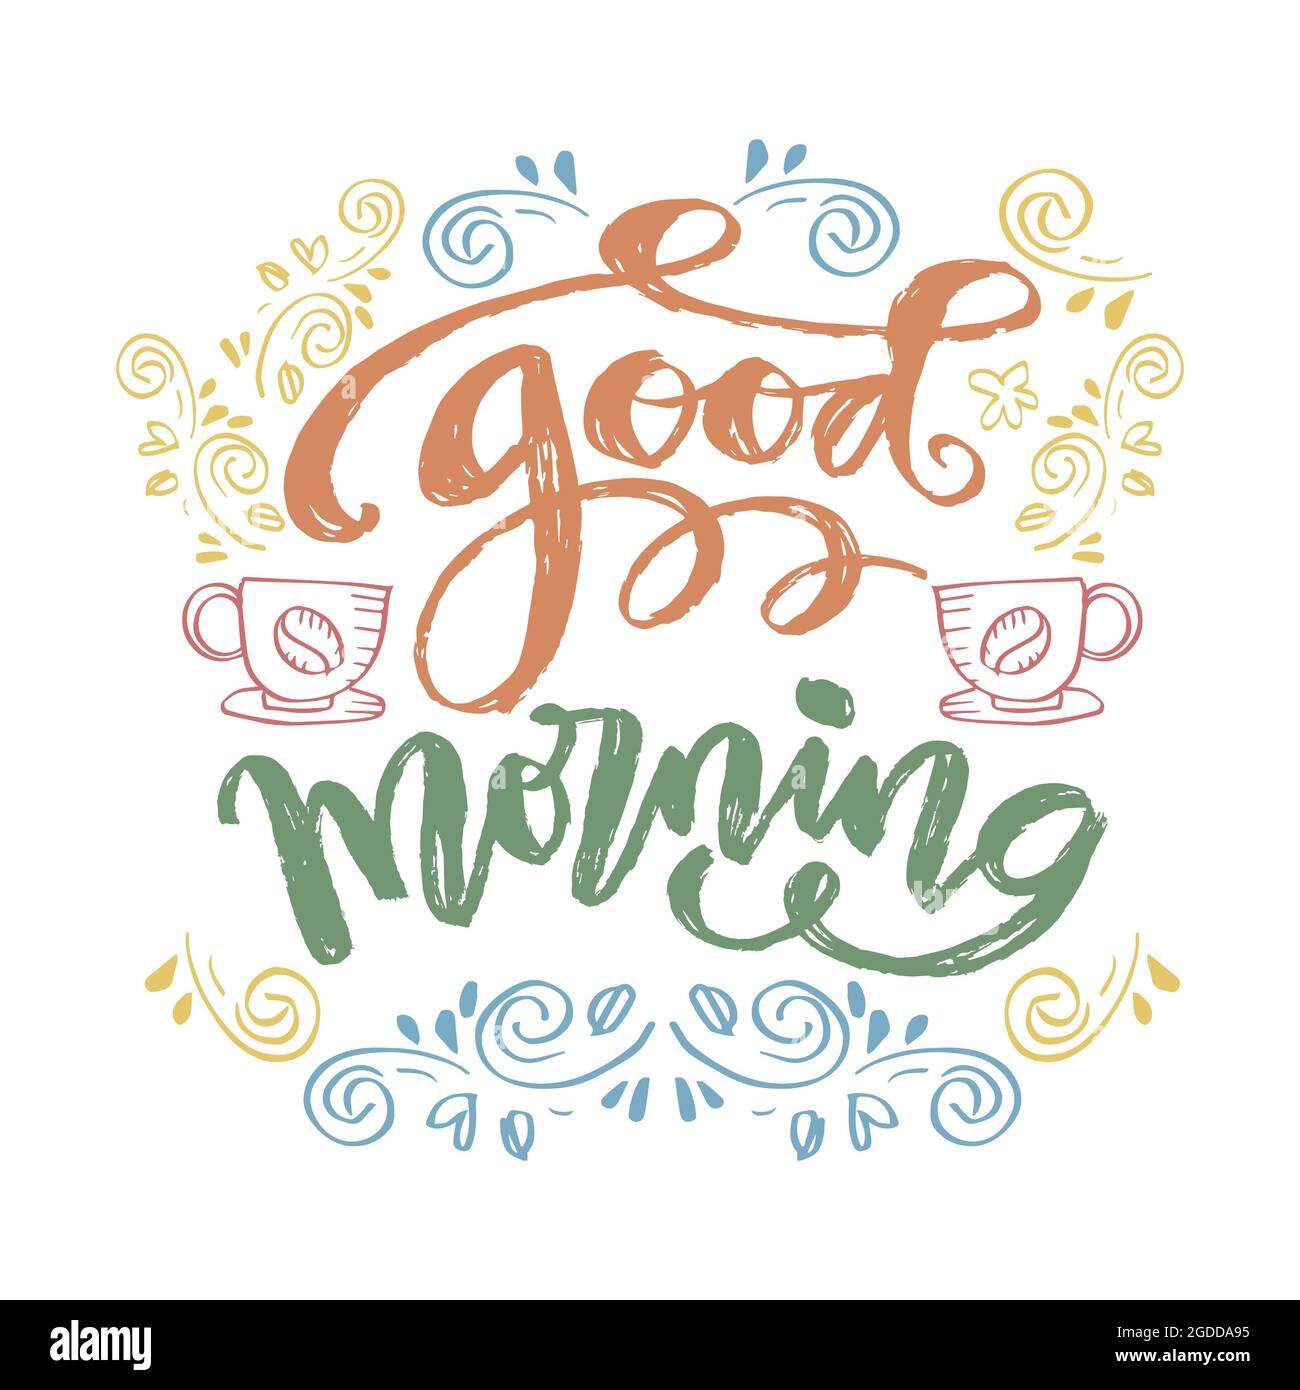 Vintage of Good morning lettering. Greeting card Stock Photo - Alamy